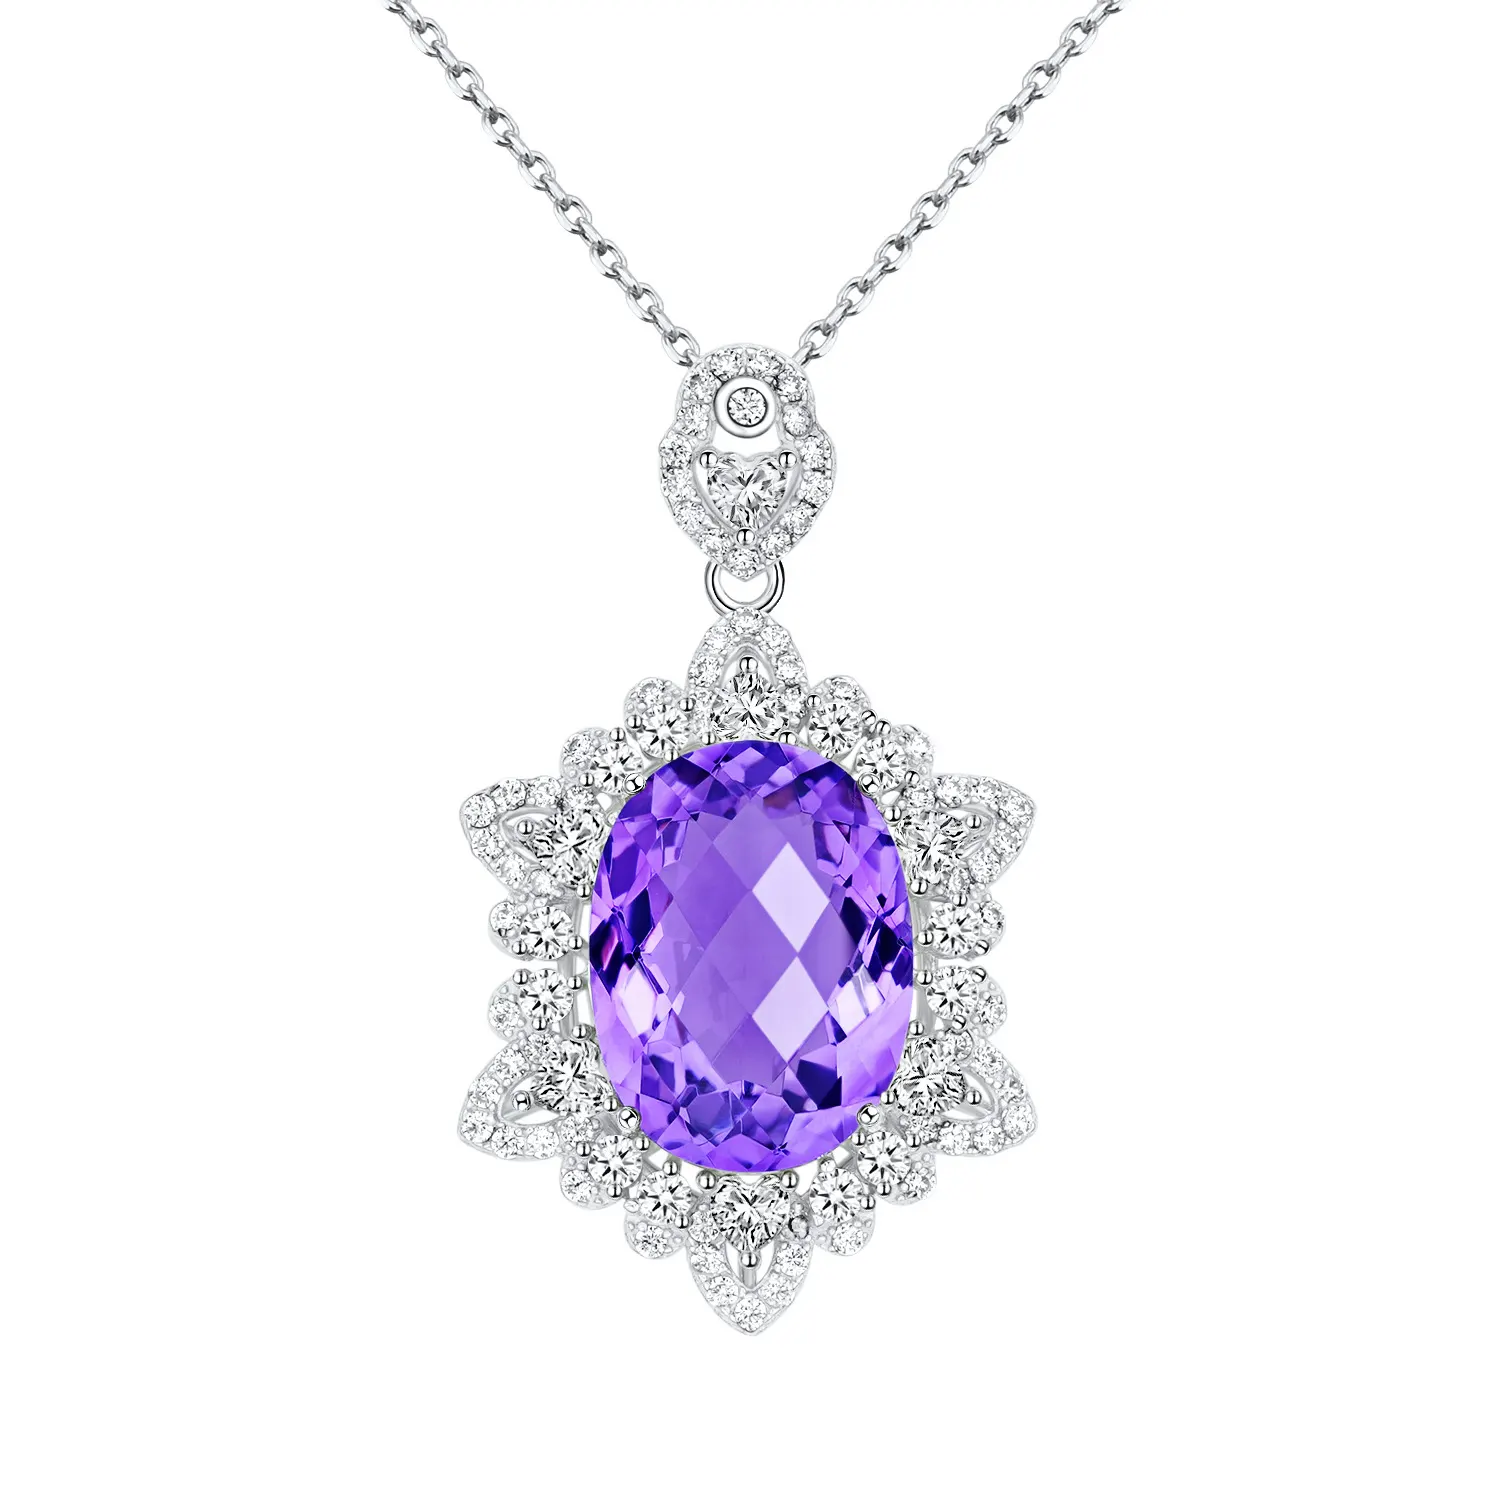 Classy pendant necklace with amethyst birthstone - main